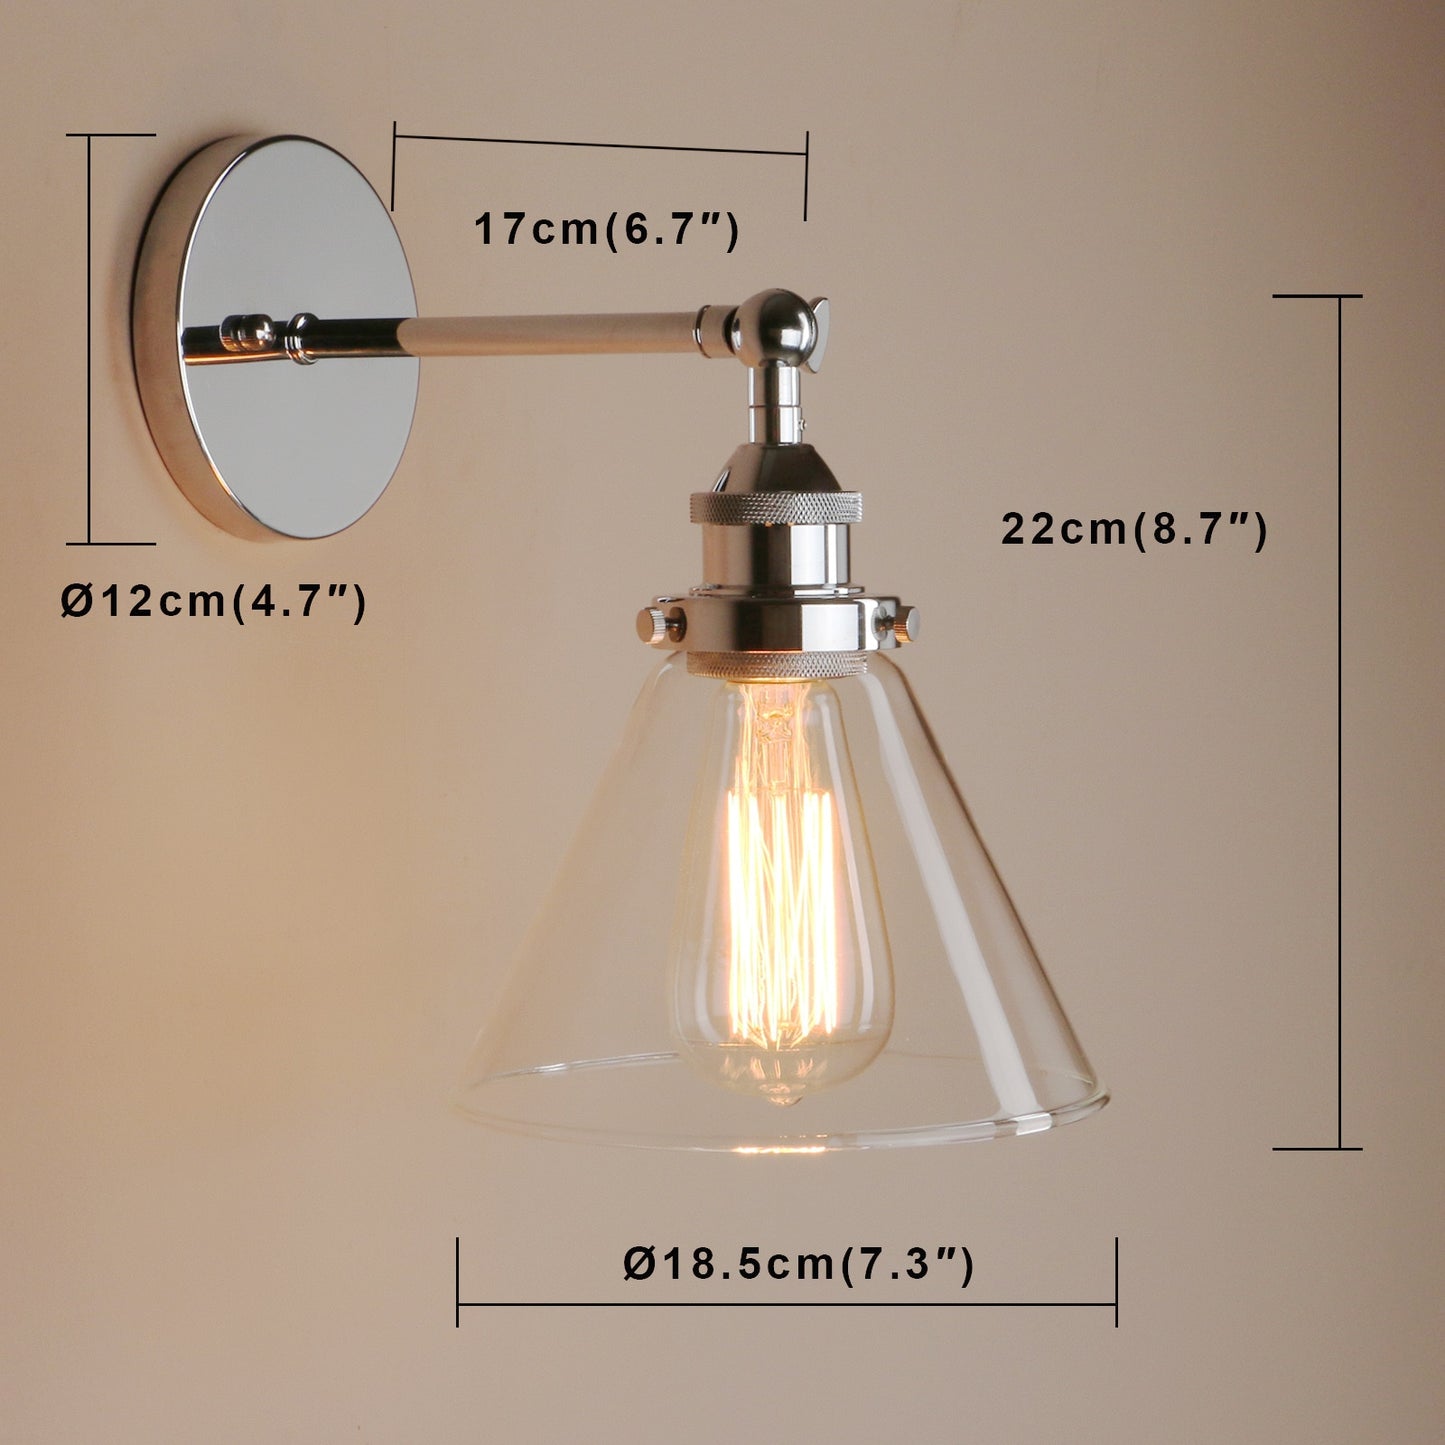 Wall Sconce dimensions